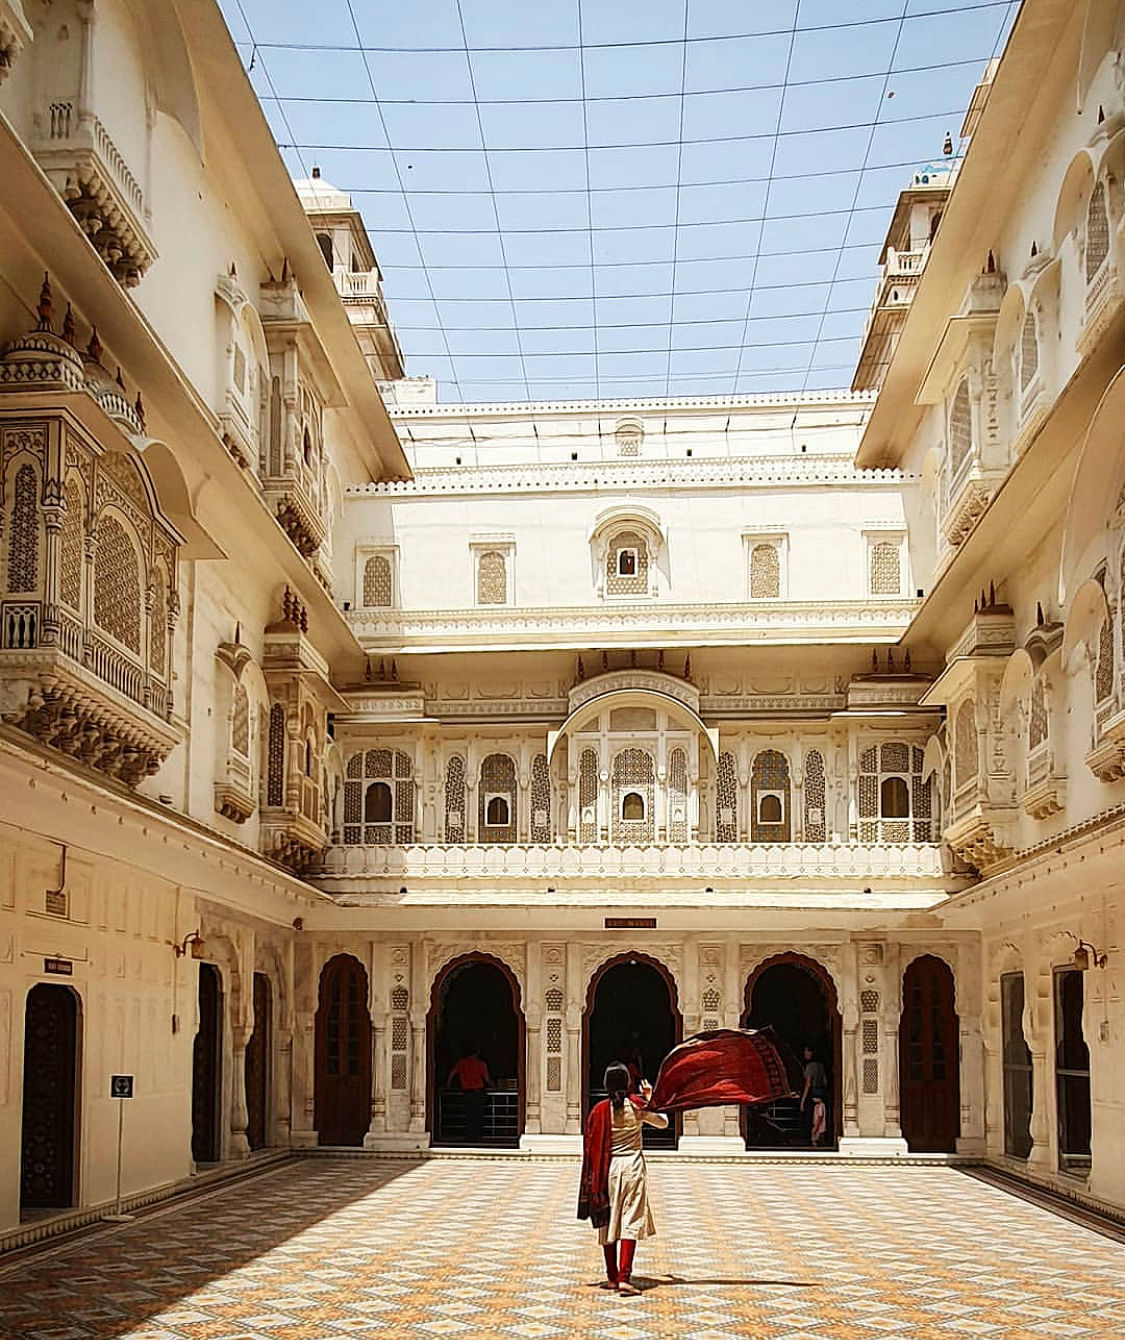 Every meal was a pleasant surprise – like Bikaner itself, an underrated destination that never stops surprising.